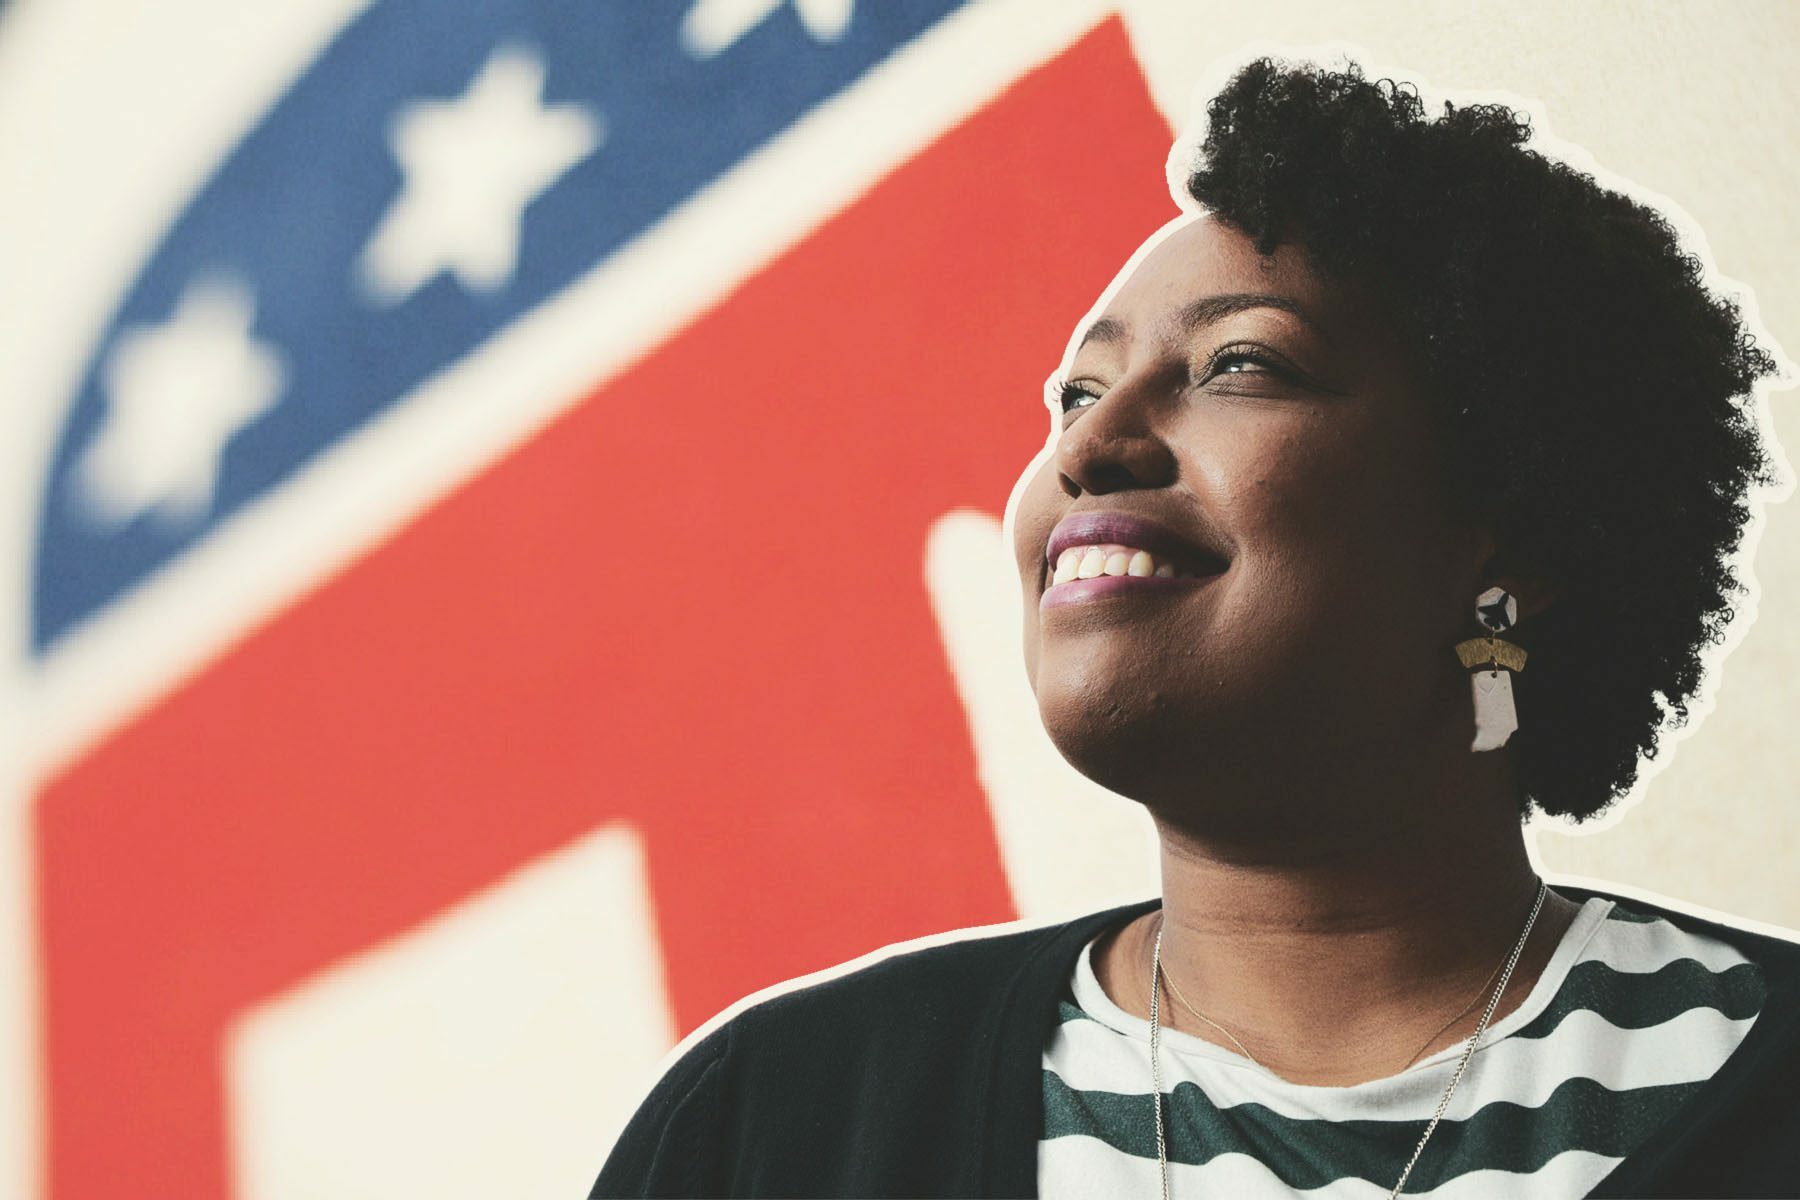 A photo-illustration shows Jennifer-Ruth Green, Republican candidate for Indiana's 1st Congressional District, in front of the symbol of the Republic Party.